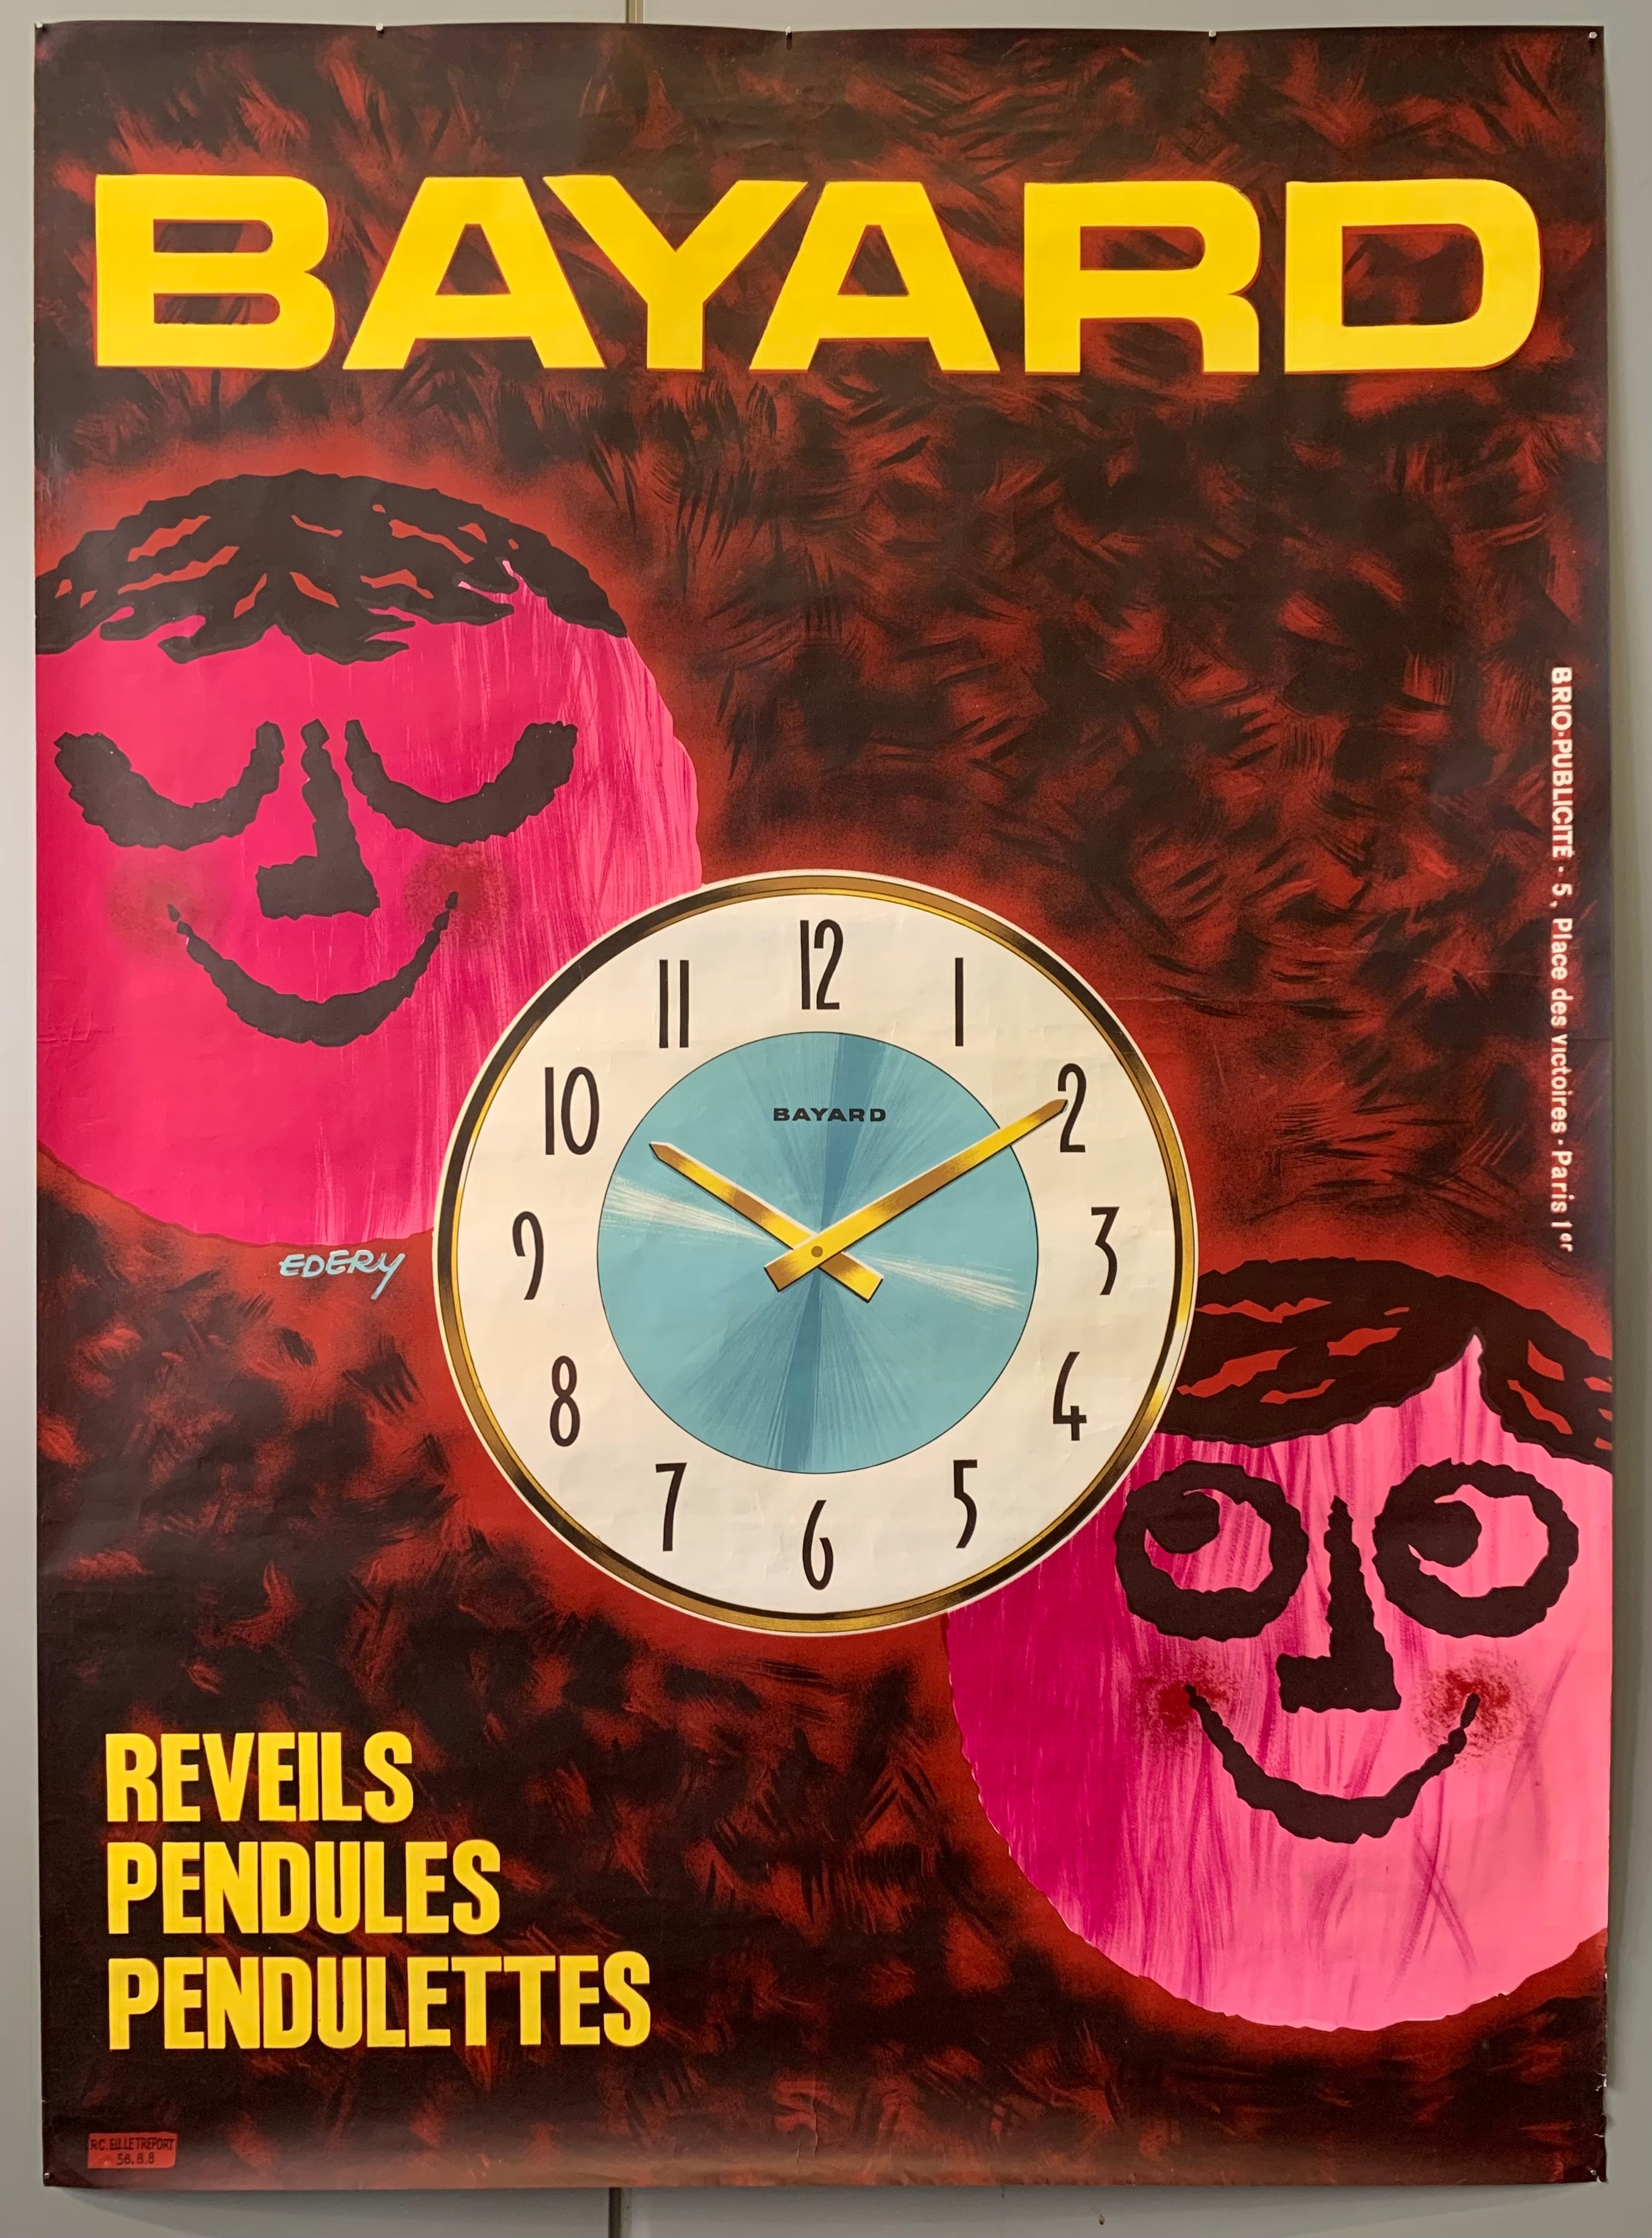 Two clock-shaped men eye one shiny clock in the center of the page. The men are pink. The background is red with black dashes. The font is large and yellow. 